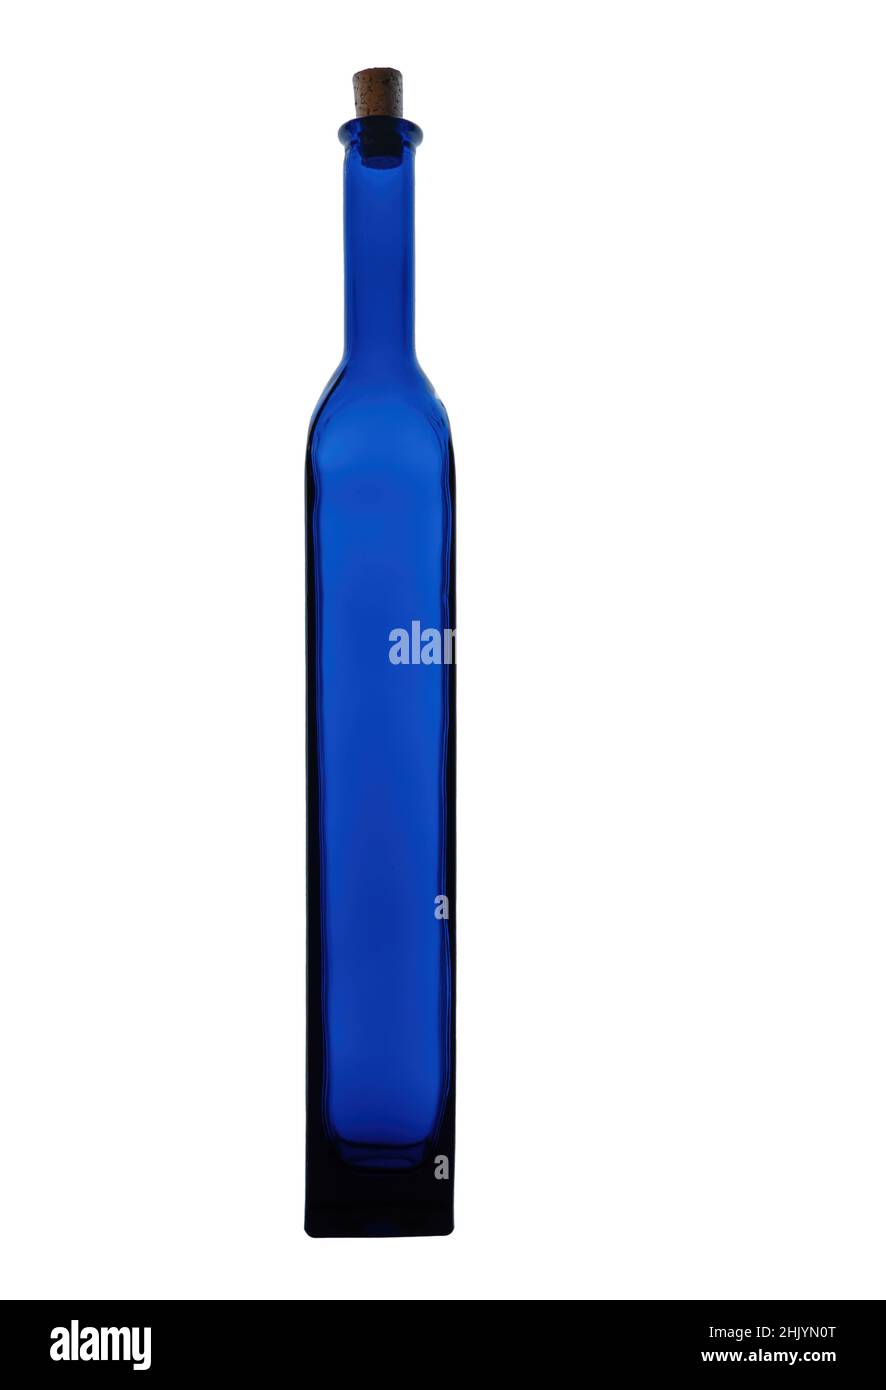 Tall, thin, bright blue glass bottle isolated on white background. Stock Photo